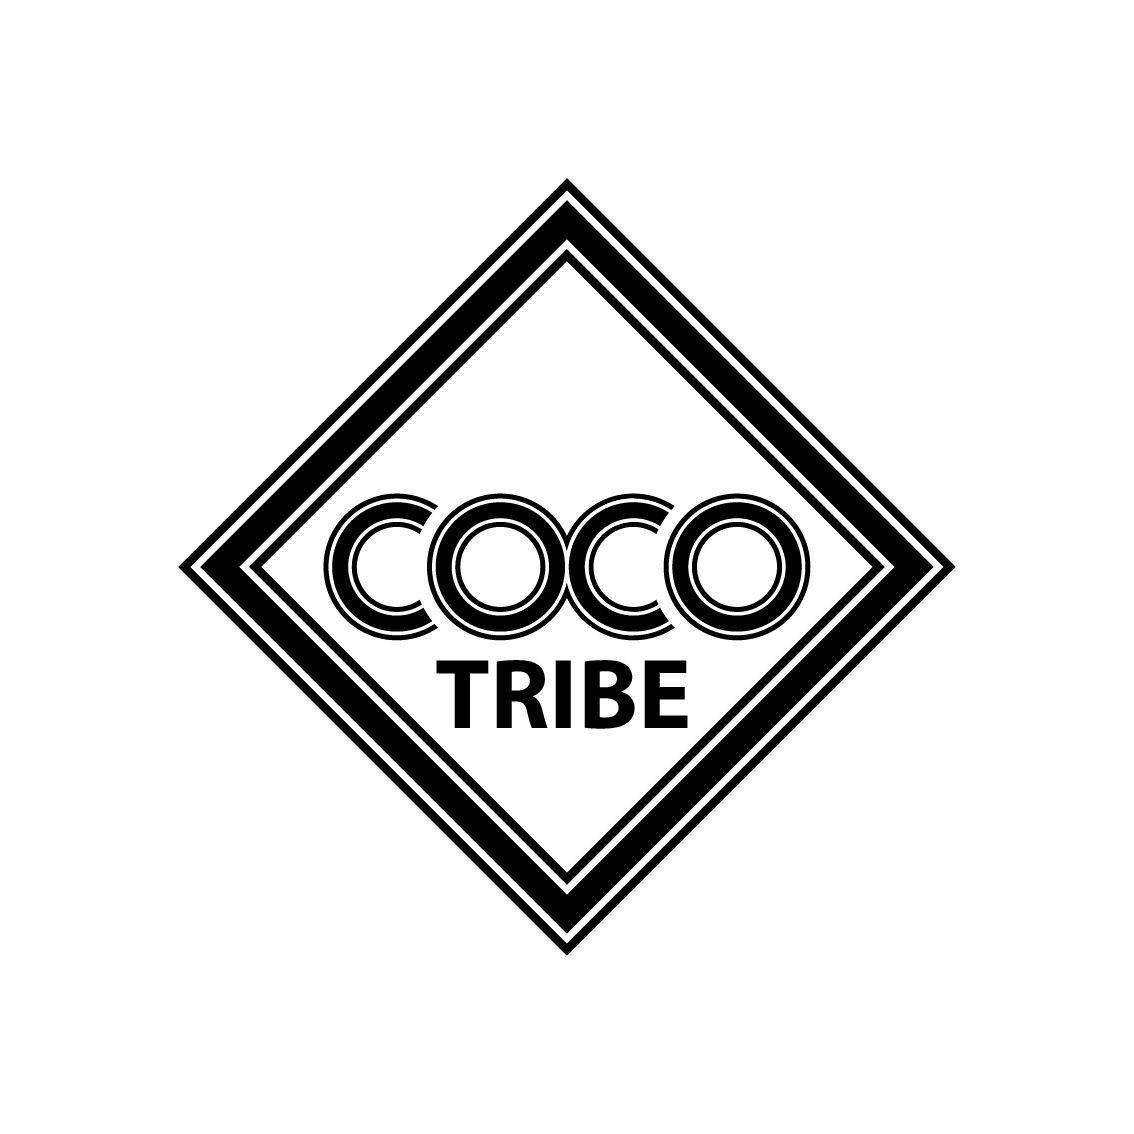 Y Brand Logo - Upmarket, Modern, Fashion Logo Design for CoCo Tribe or Co&Co Tribe